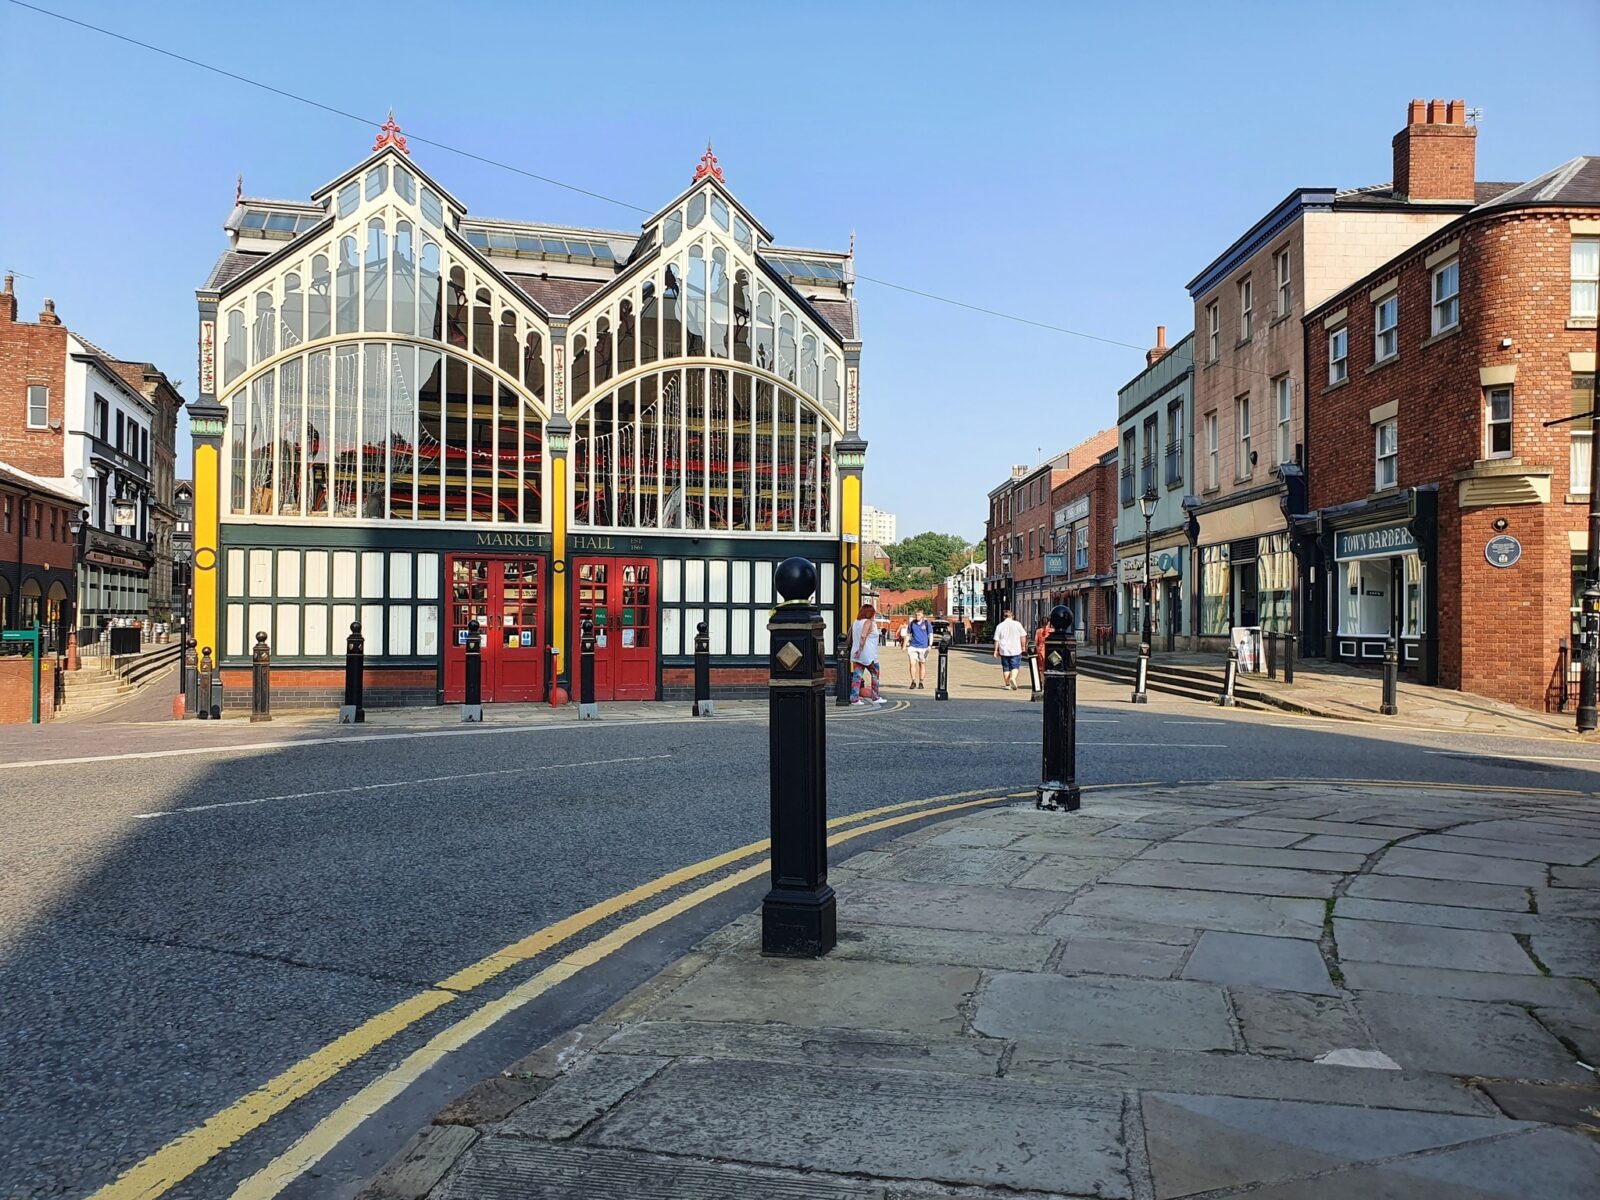 Stockport named one of the best 'up and coming' areas to invest in 2022